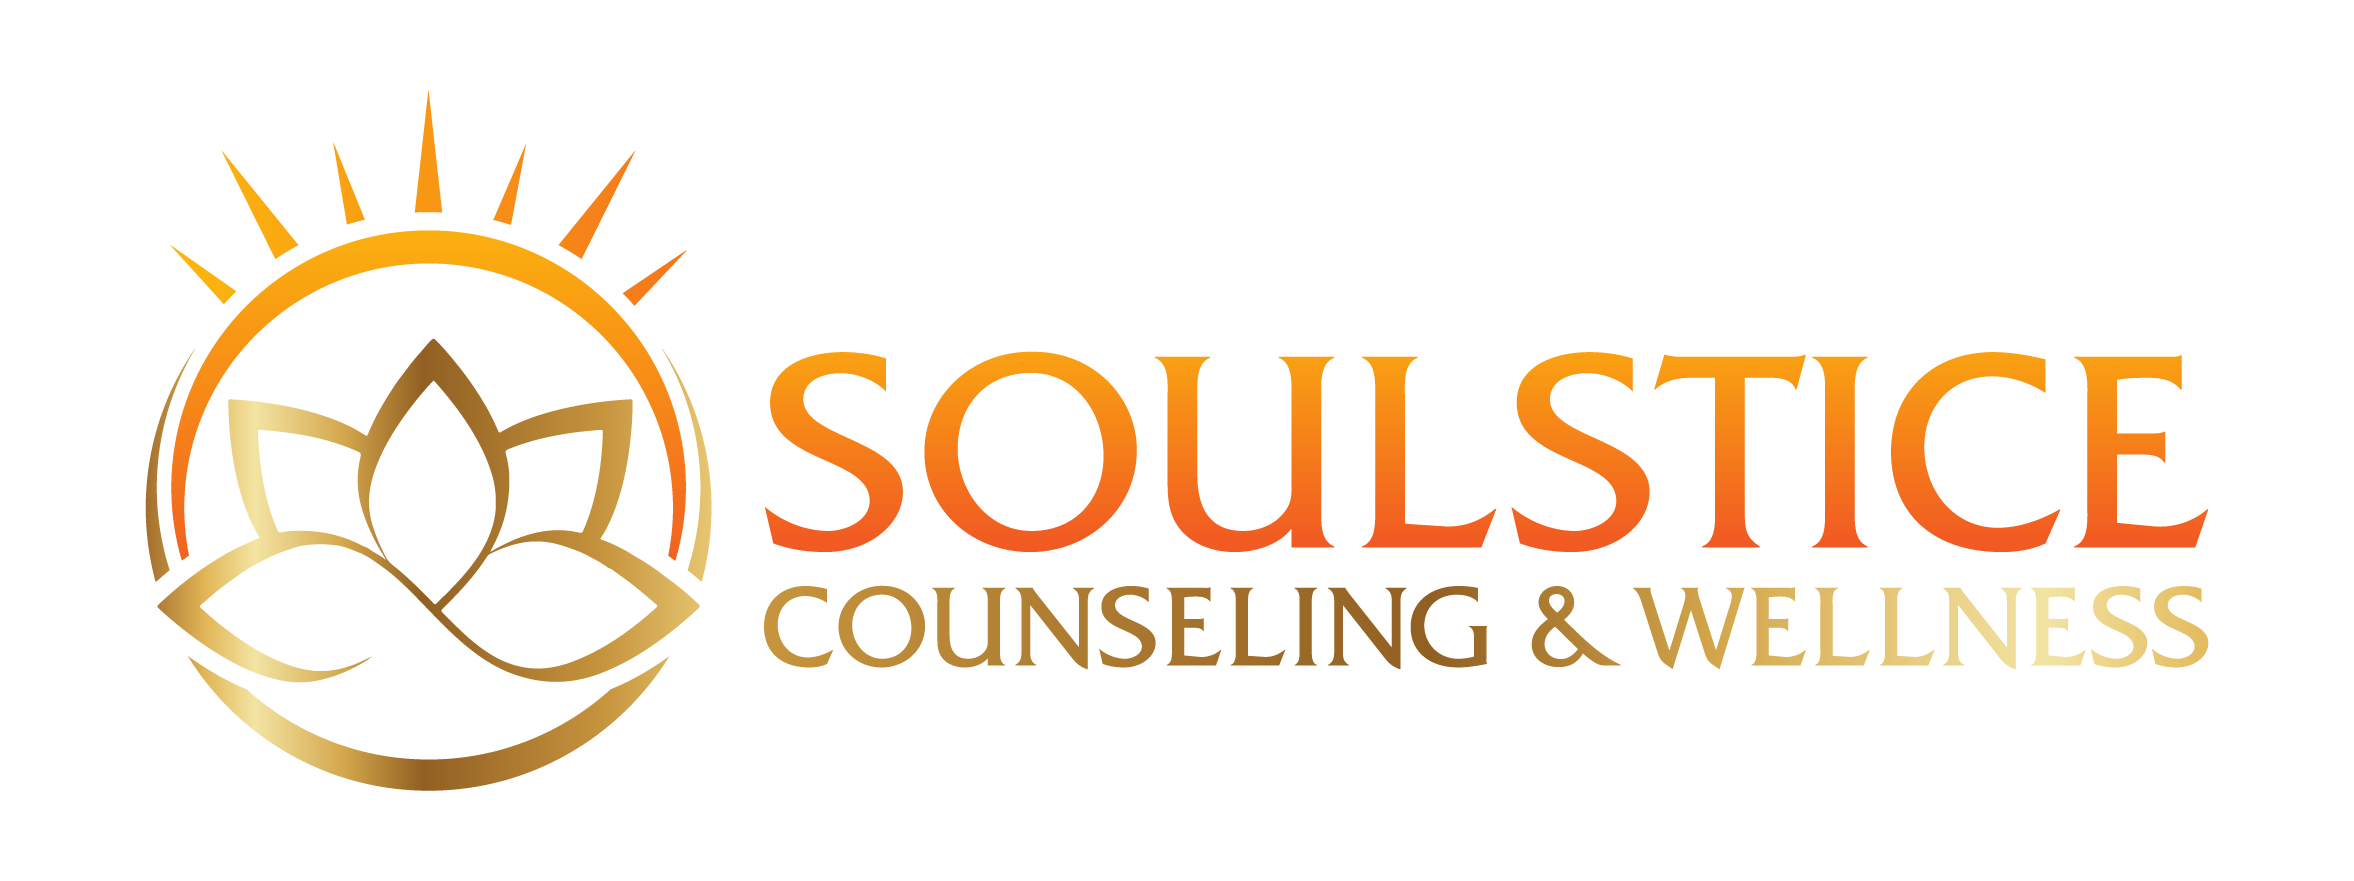 Soulstice Counseling and Wellness